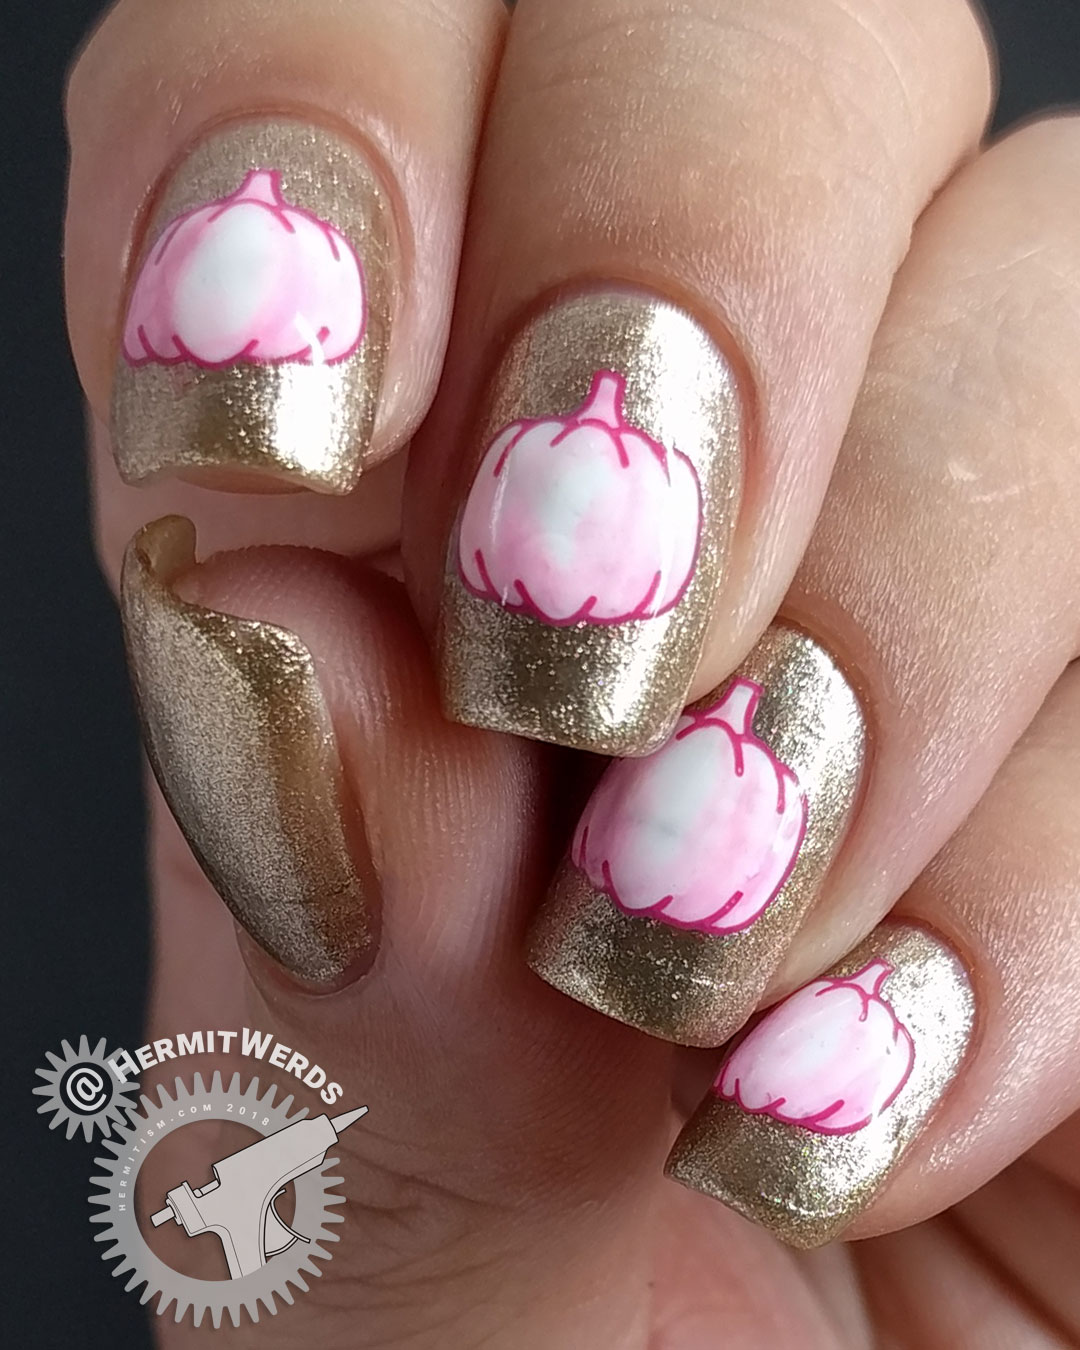 Glam-kin - Hermit Werds - nail art of a white pumpkin stamping tinted a little bit pink on a glitzy golden background